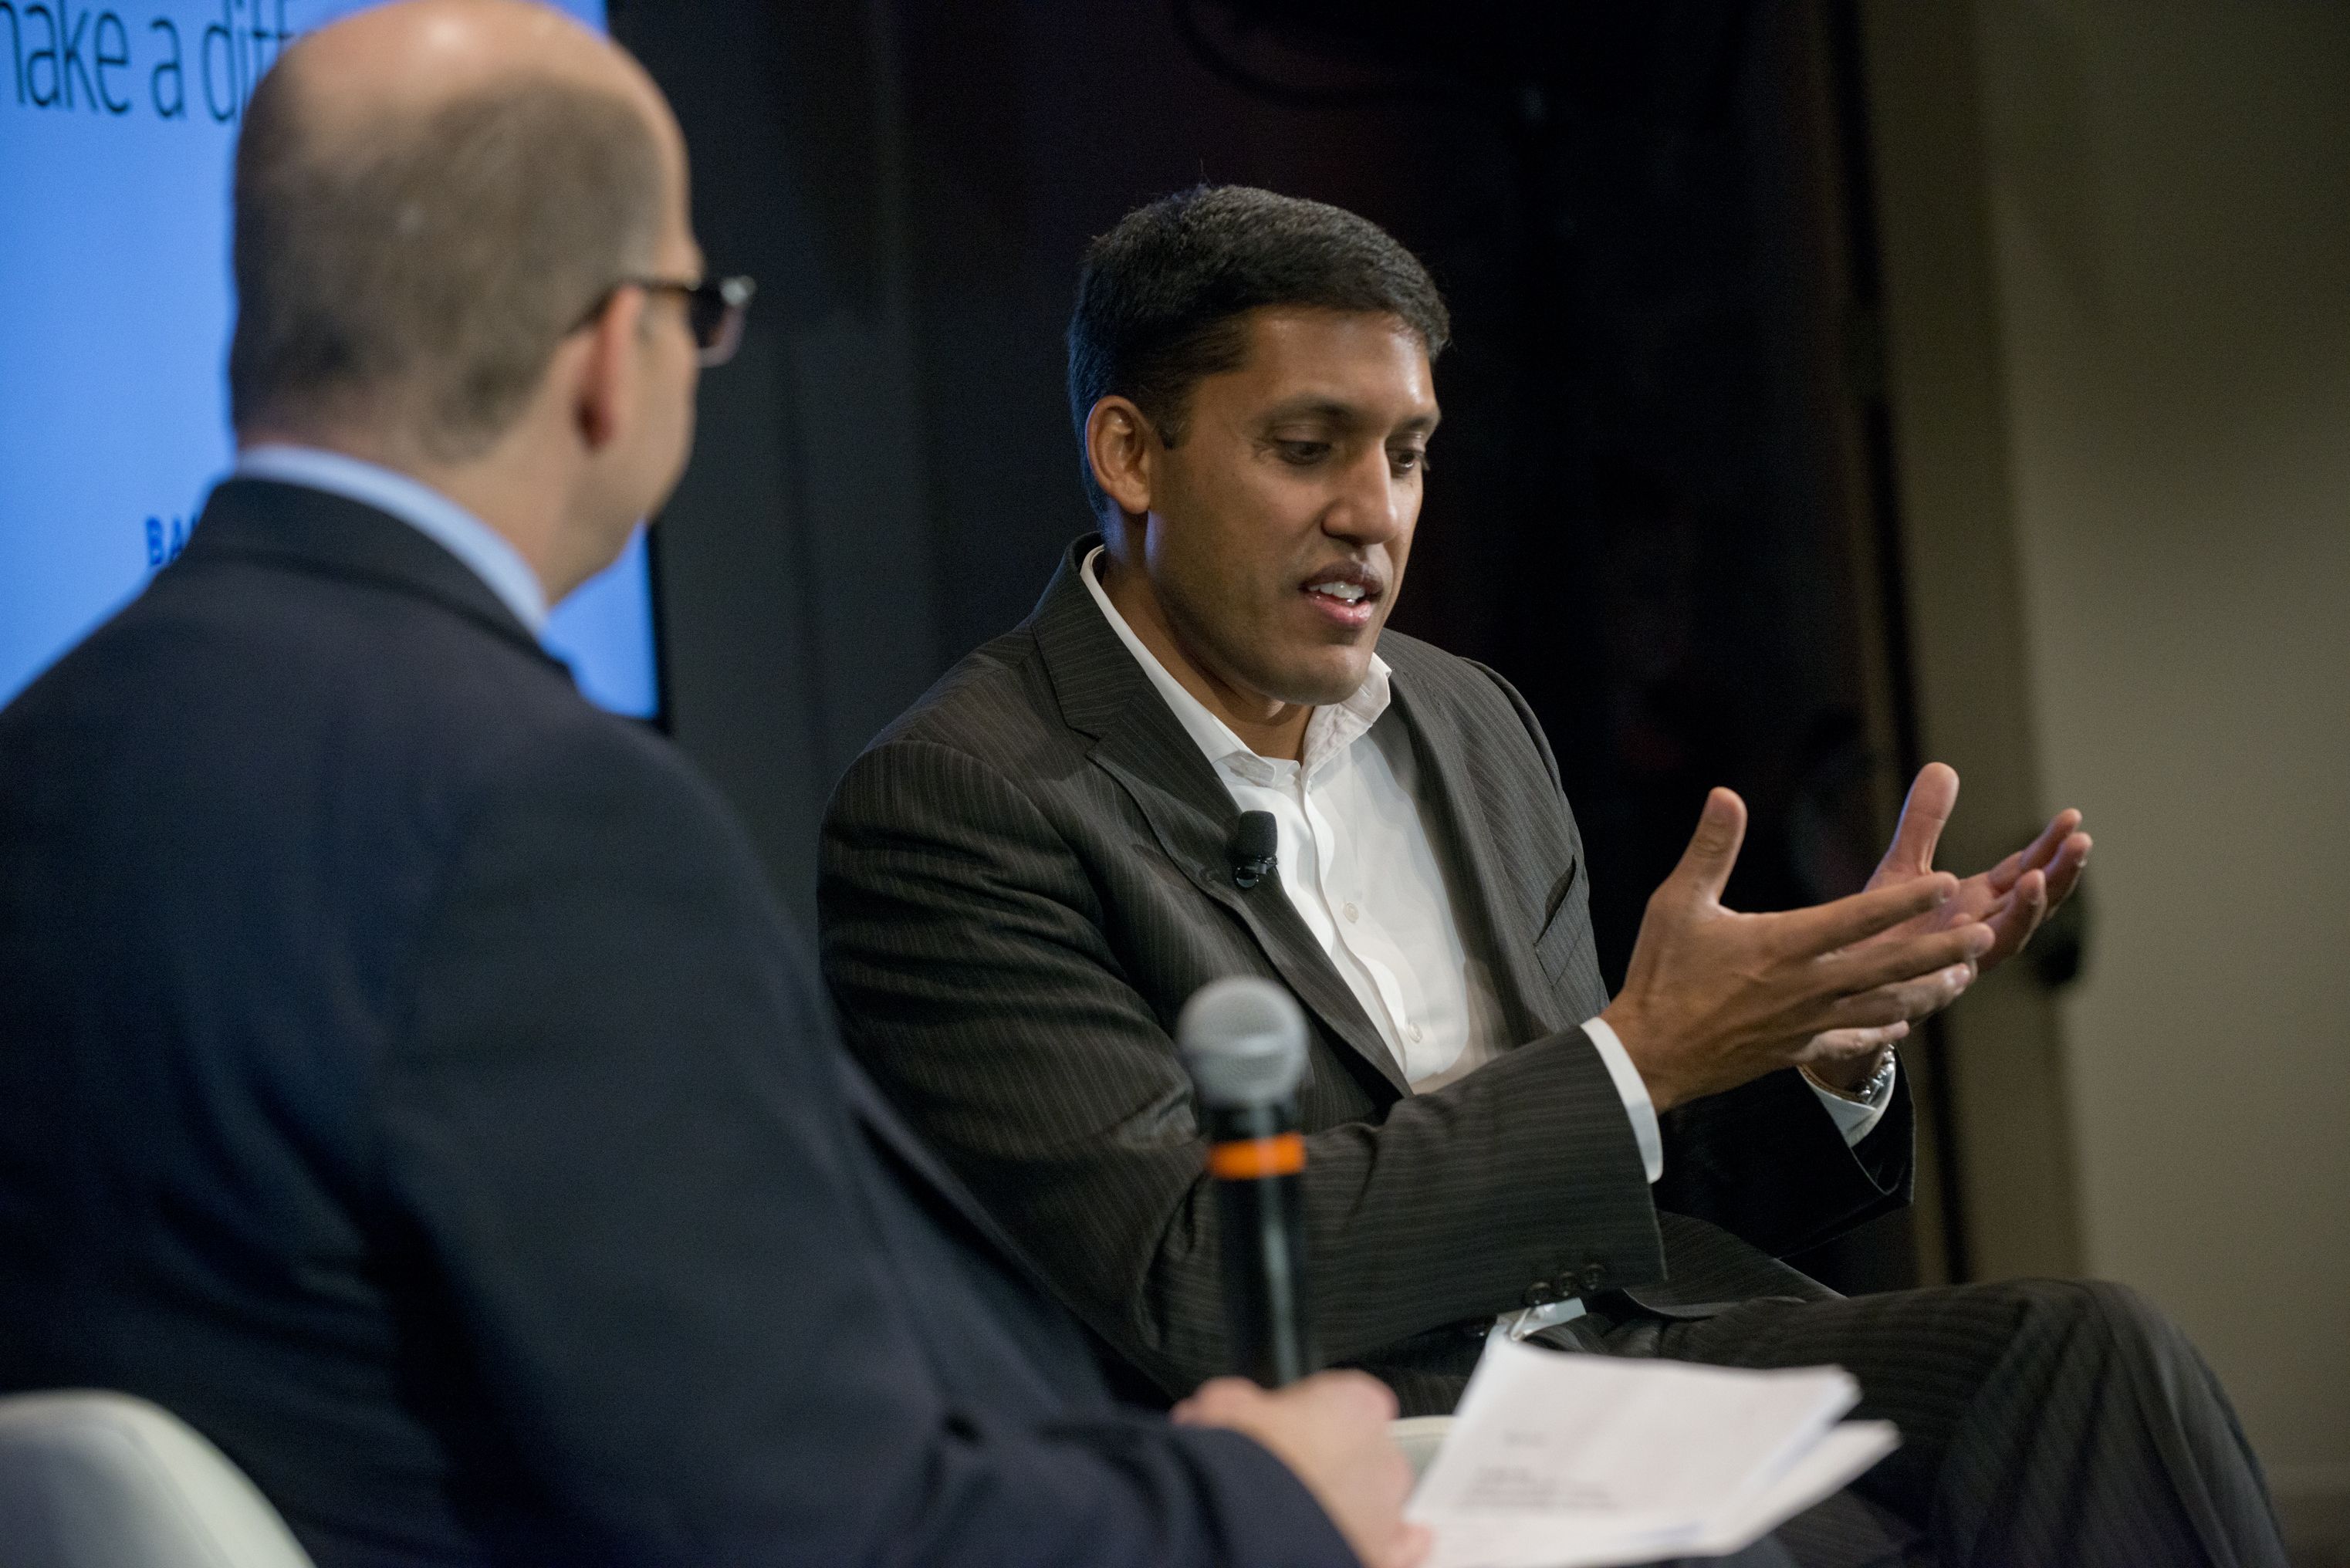 Dr. Rajiv Shah on the Axios stage